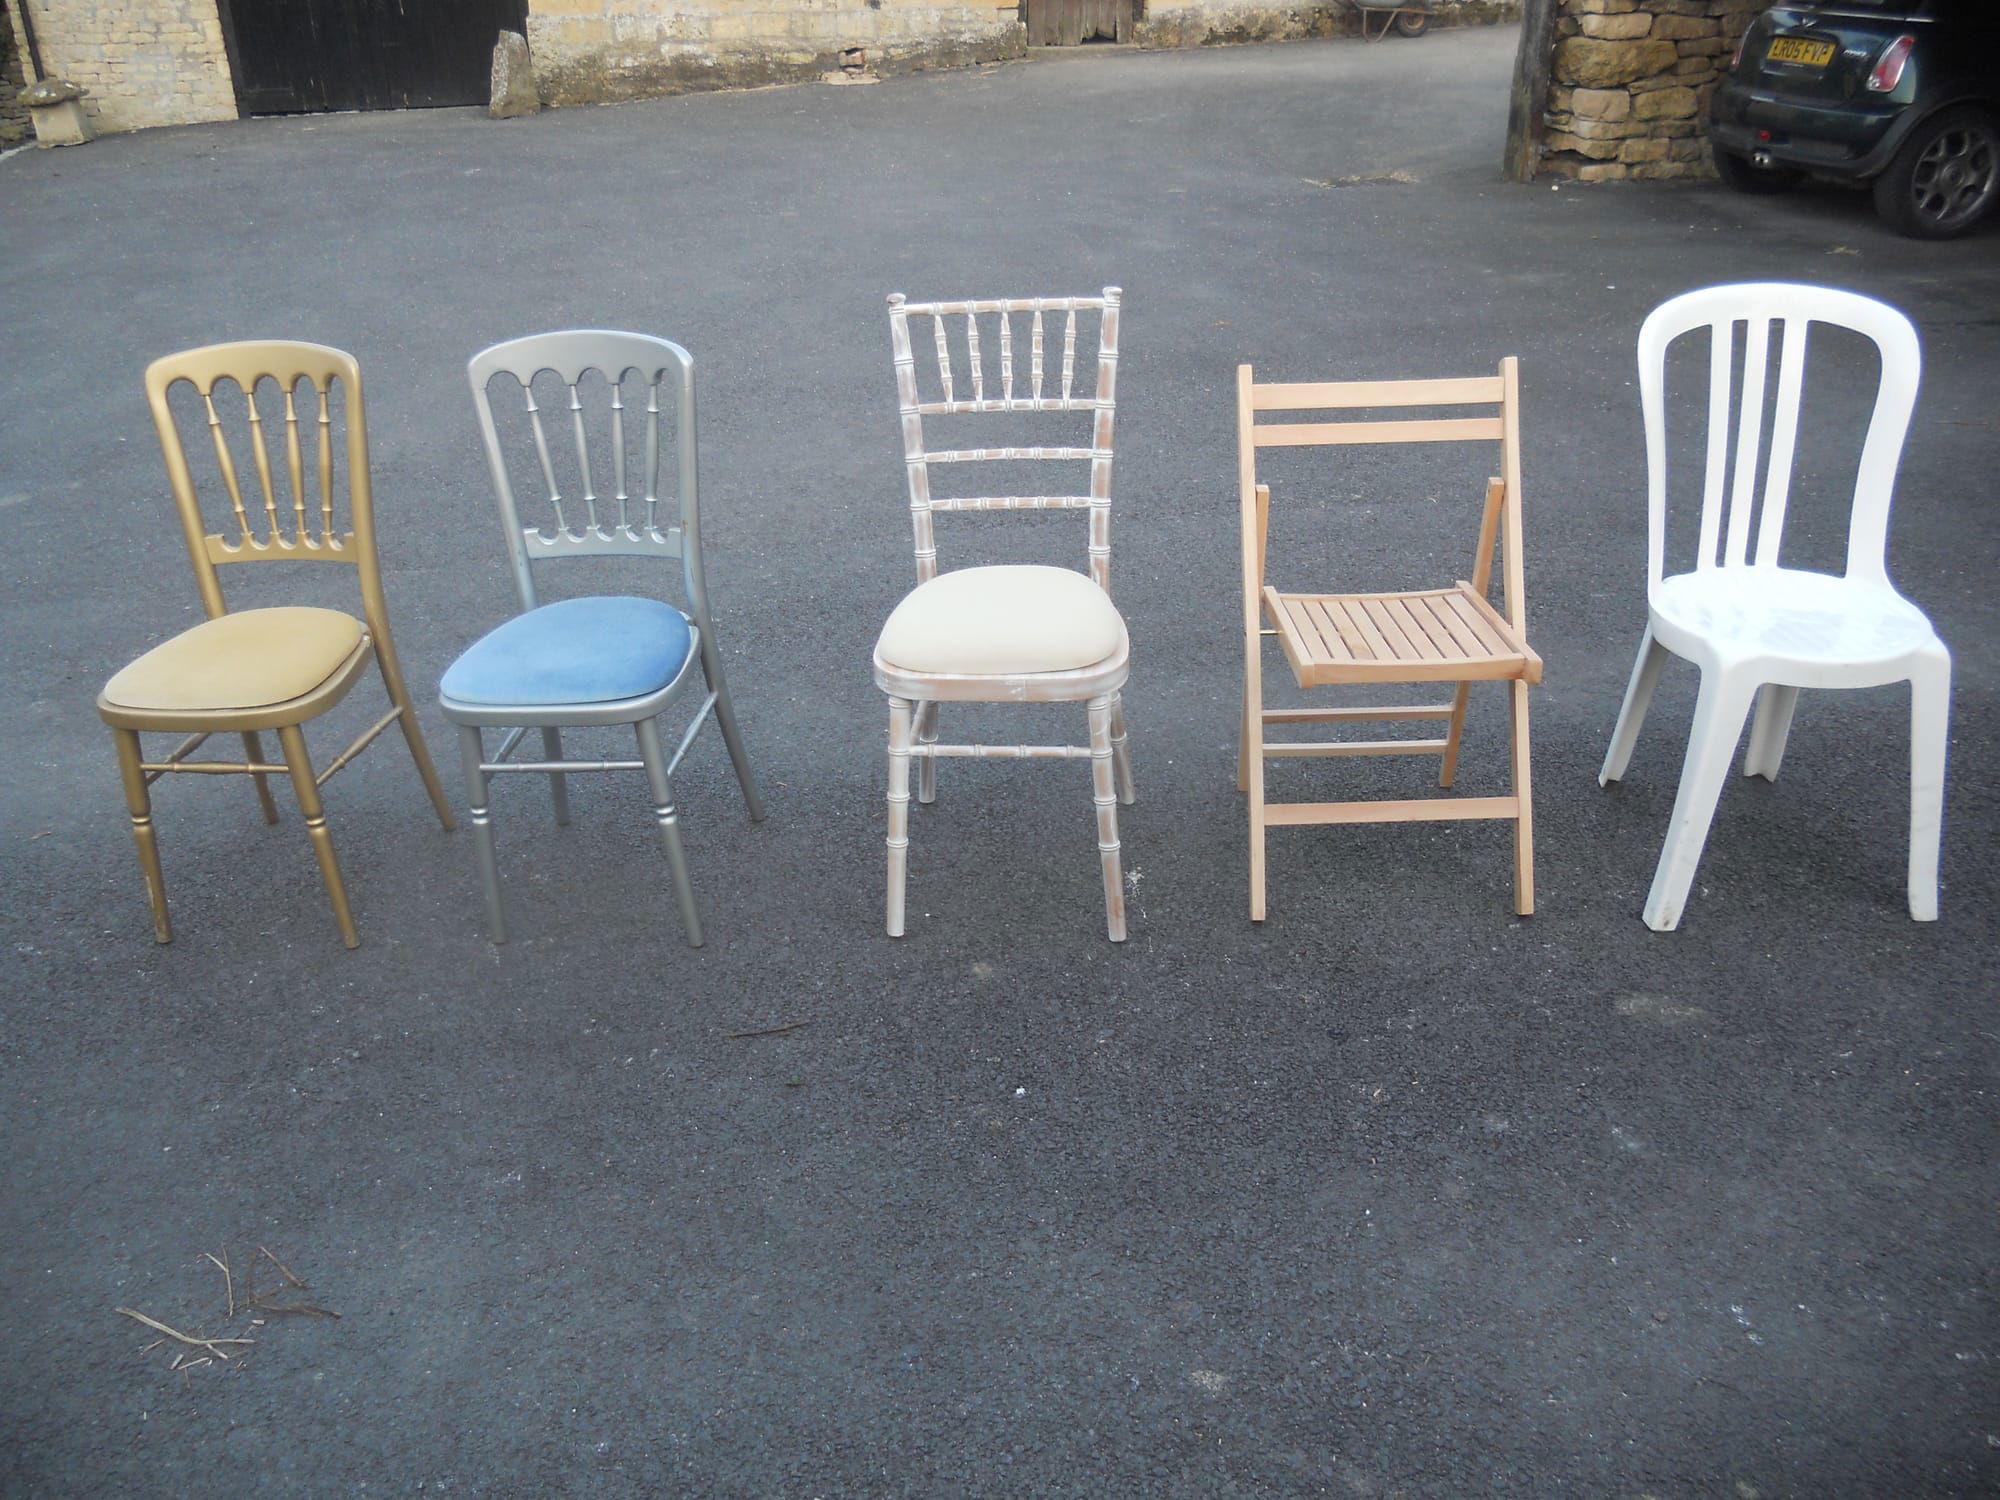 Chairs - If the one that you want is not shown, we can source them.